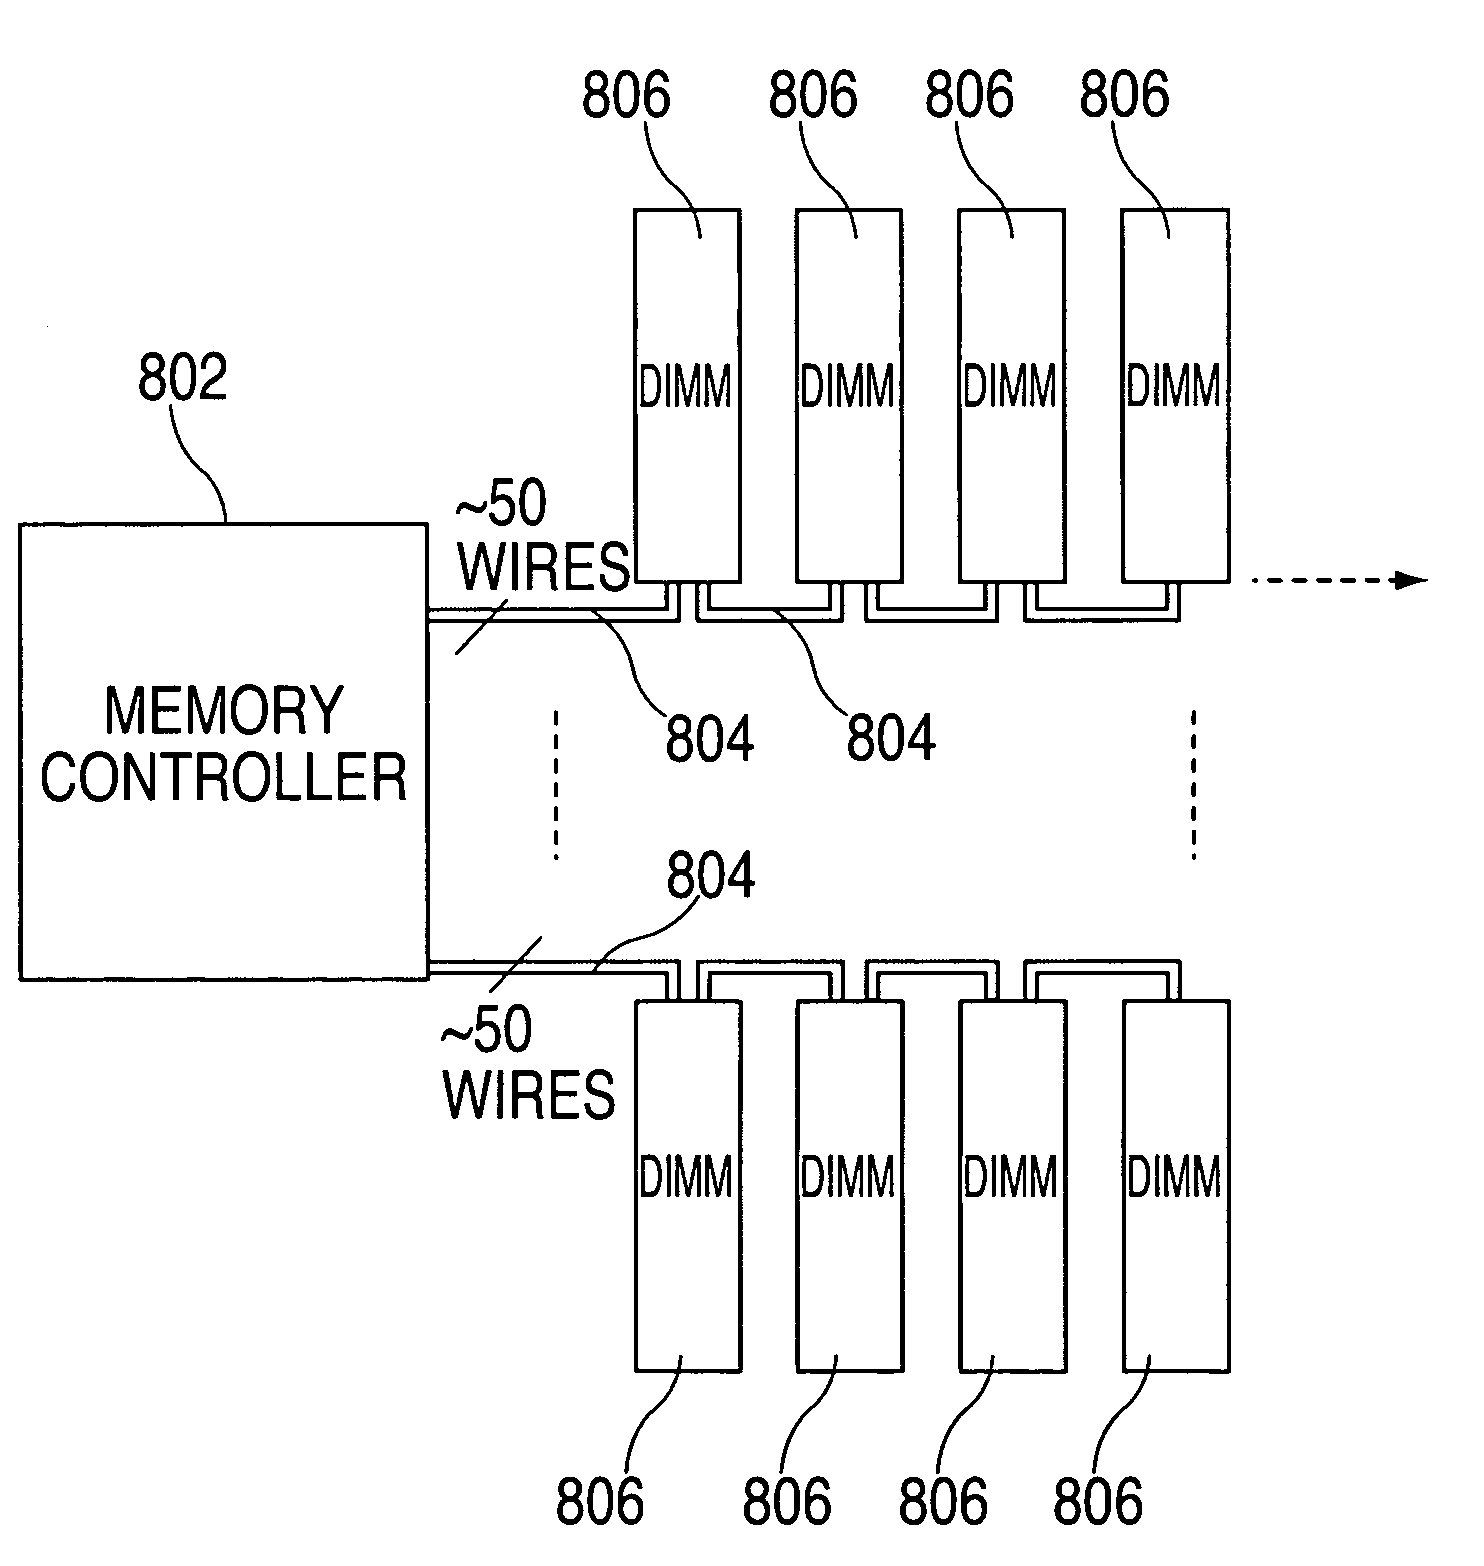 System, method and storage medium for providing a high speed test interface to a memory subsystem